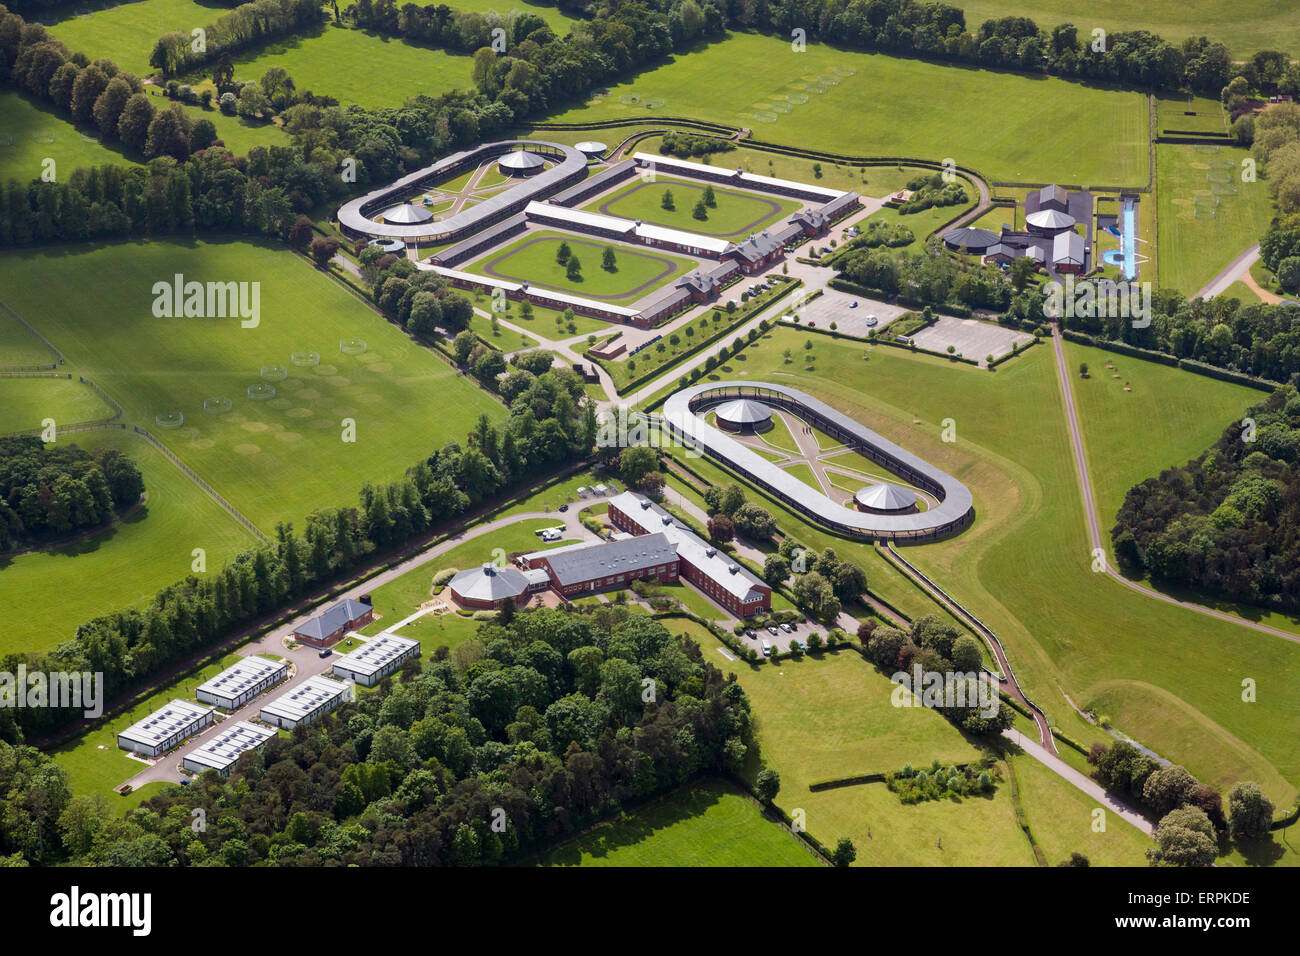 Moulton Paddocks near Newmarket owned by Godolphin Racing Stock Photo